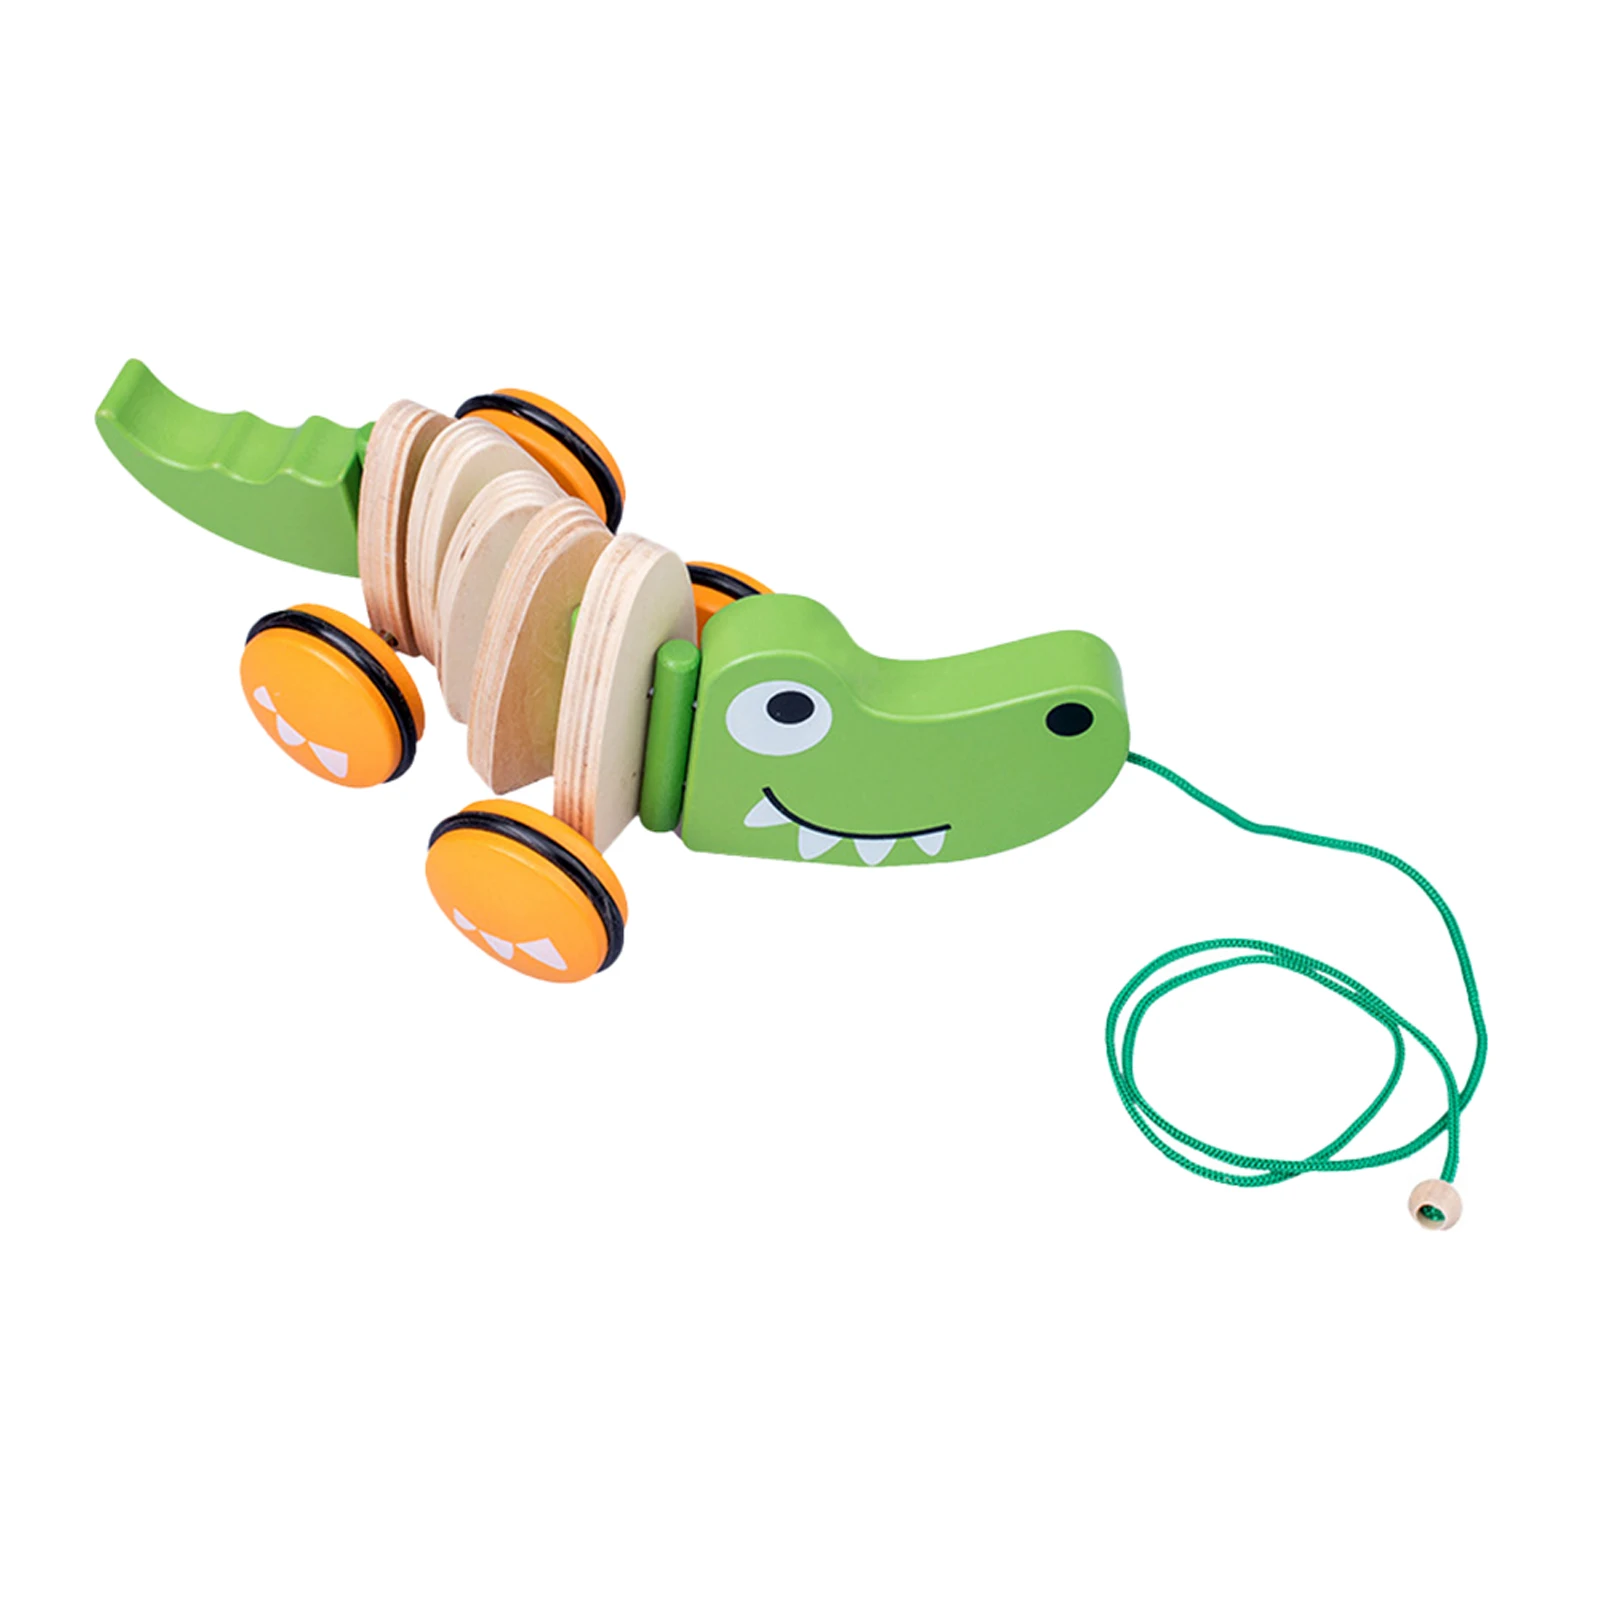 

Game Crocodile Dog Pull Along Toy Wooden For Toddlers Cute Indoor Outdoor Dragging Home Garden Gift Over 12 Months Learn Walk